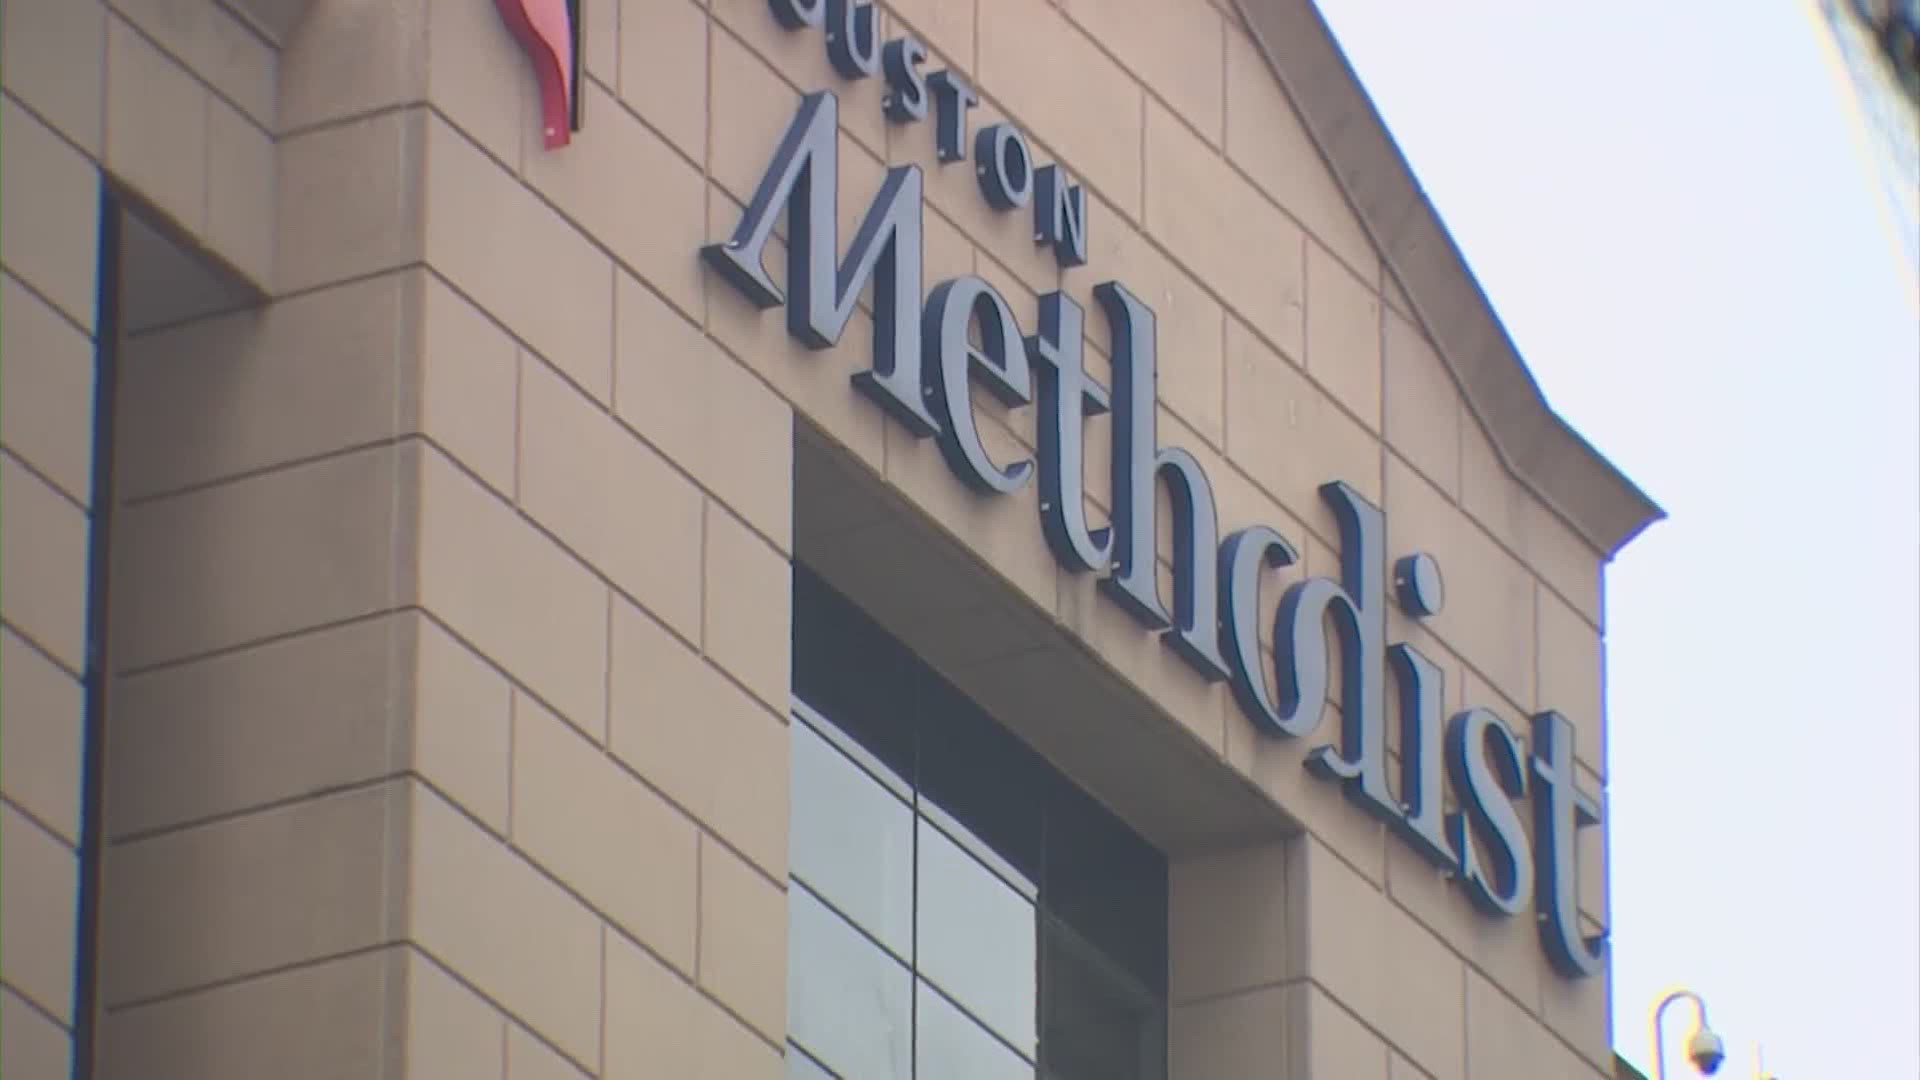 The hospital is trying to get the case dismissed with its attorneys saying it has no merit.